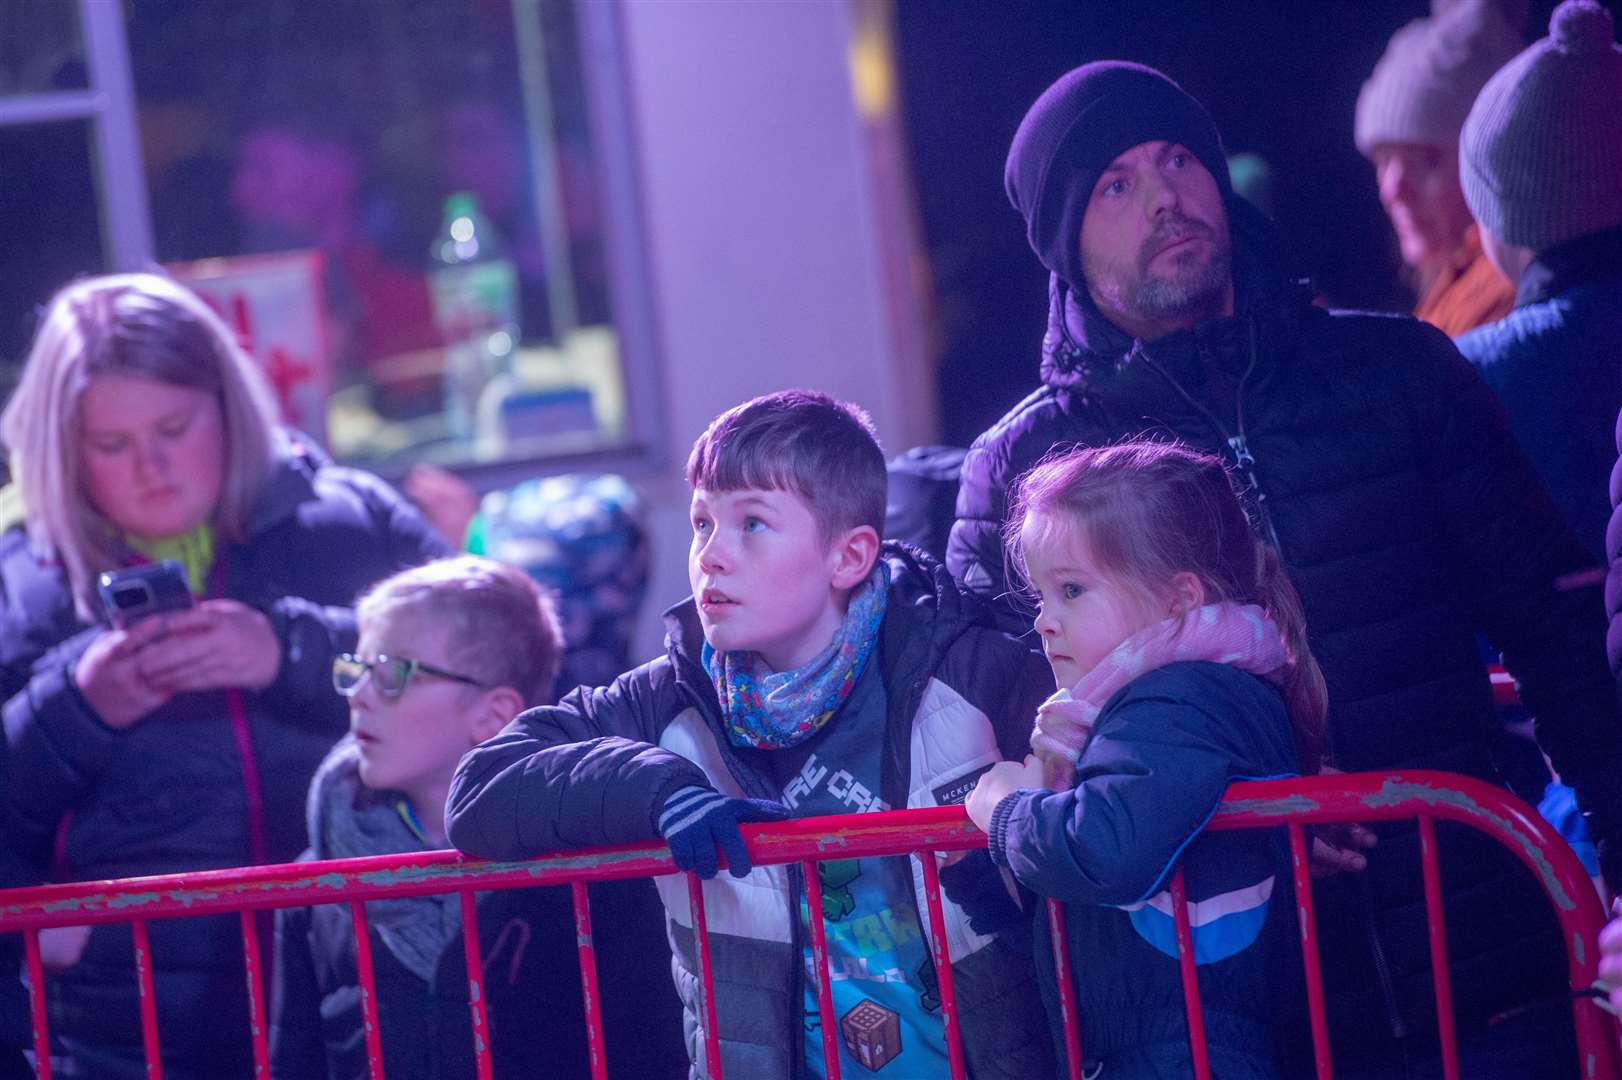 The event was for all ages. Picture: Callum Mackay